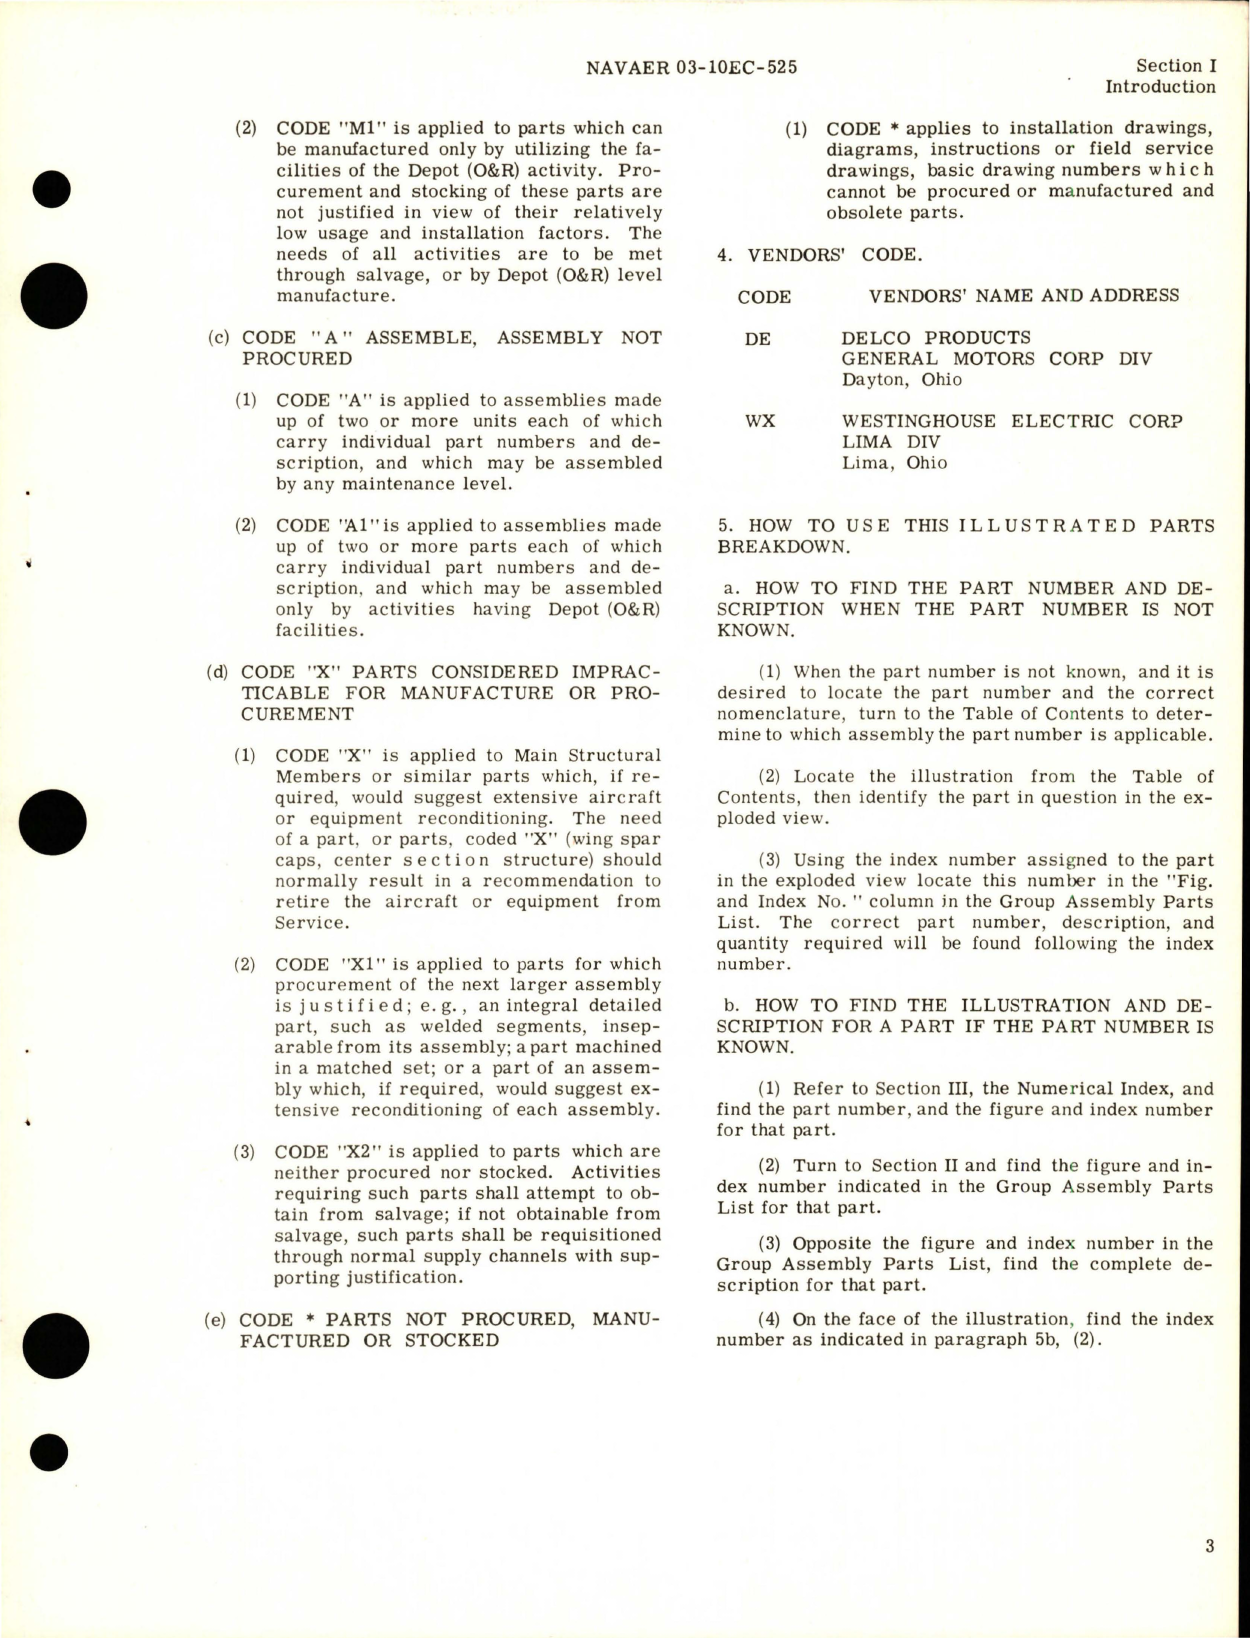 Sample page 5 from AirCorps Library document: Illustrated Parts Breakdown for Electric Motor Driven Fuel Pumps